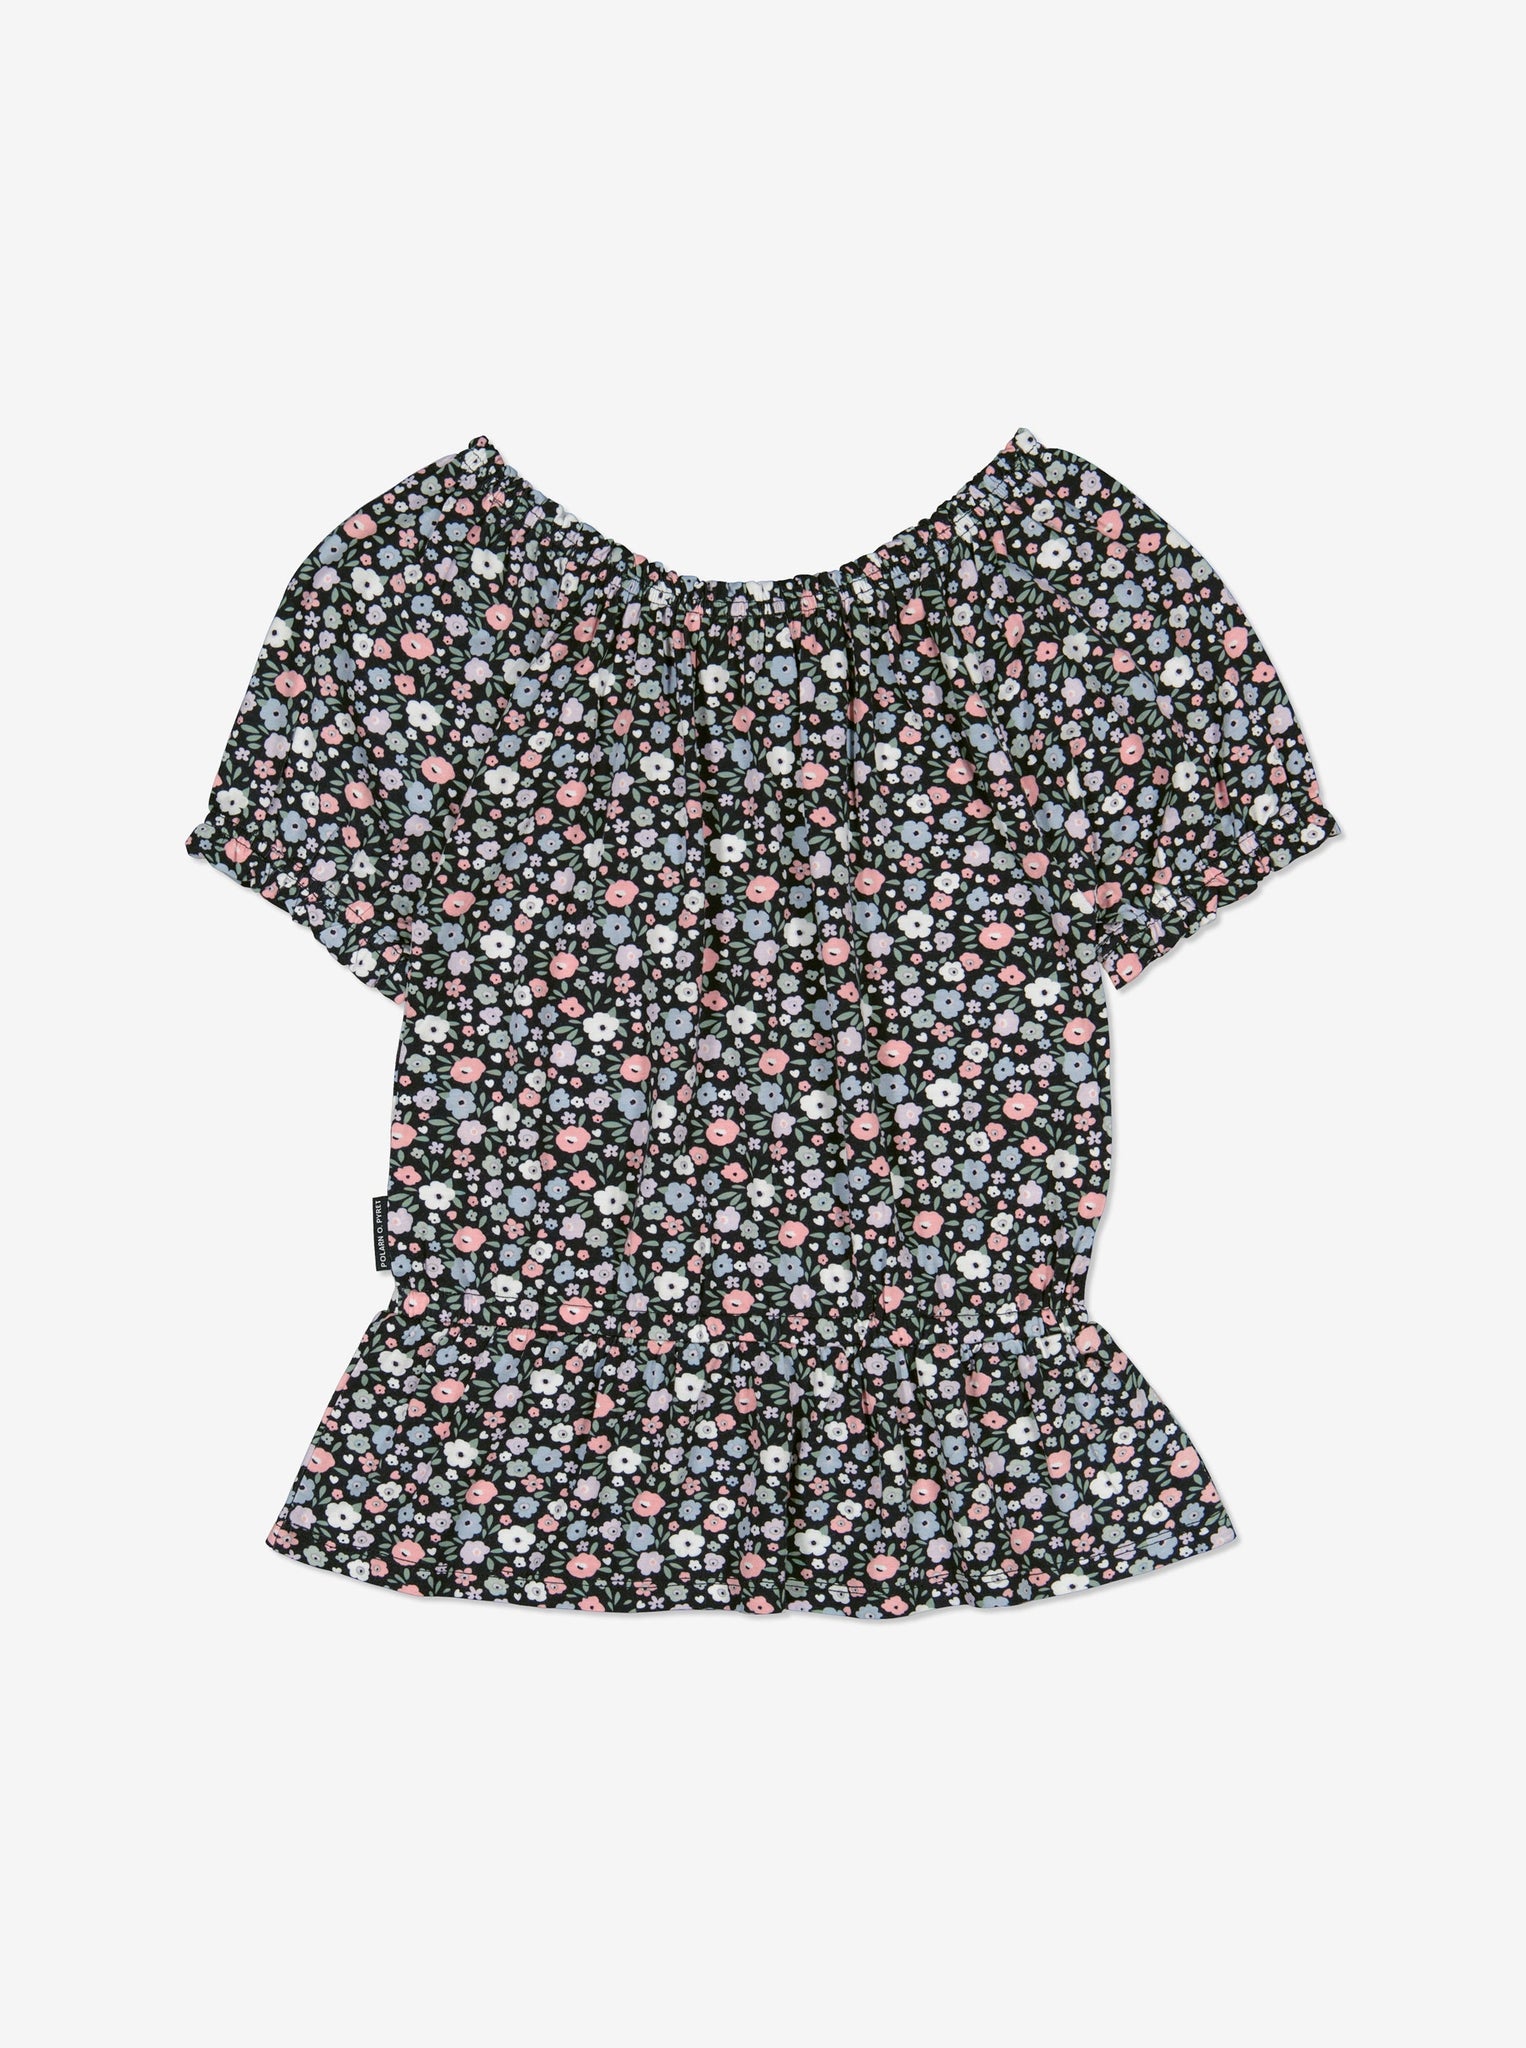  Floral Print Girls Top from Polarn O. Pyret Kidswear. Made from sustainable materials.